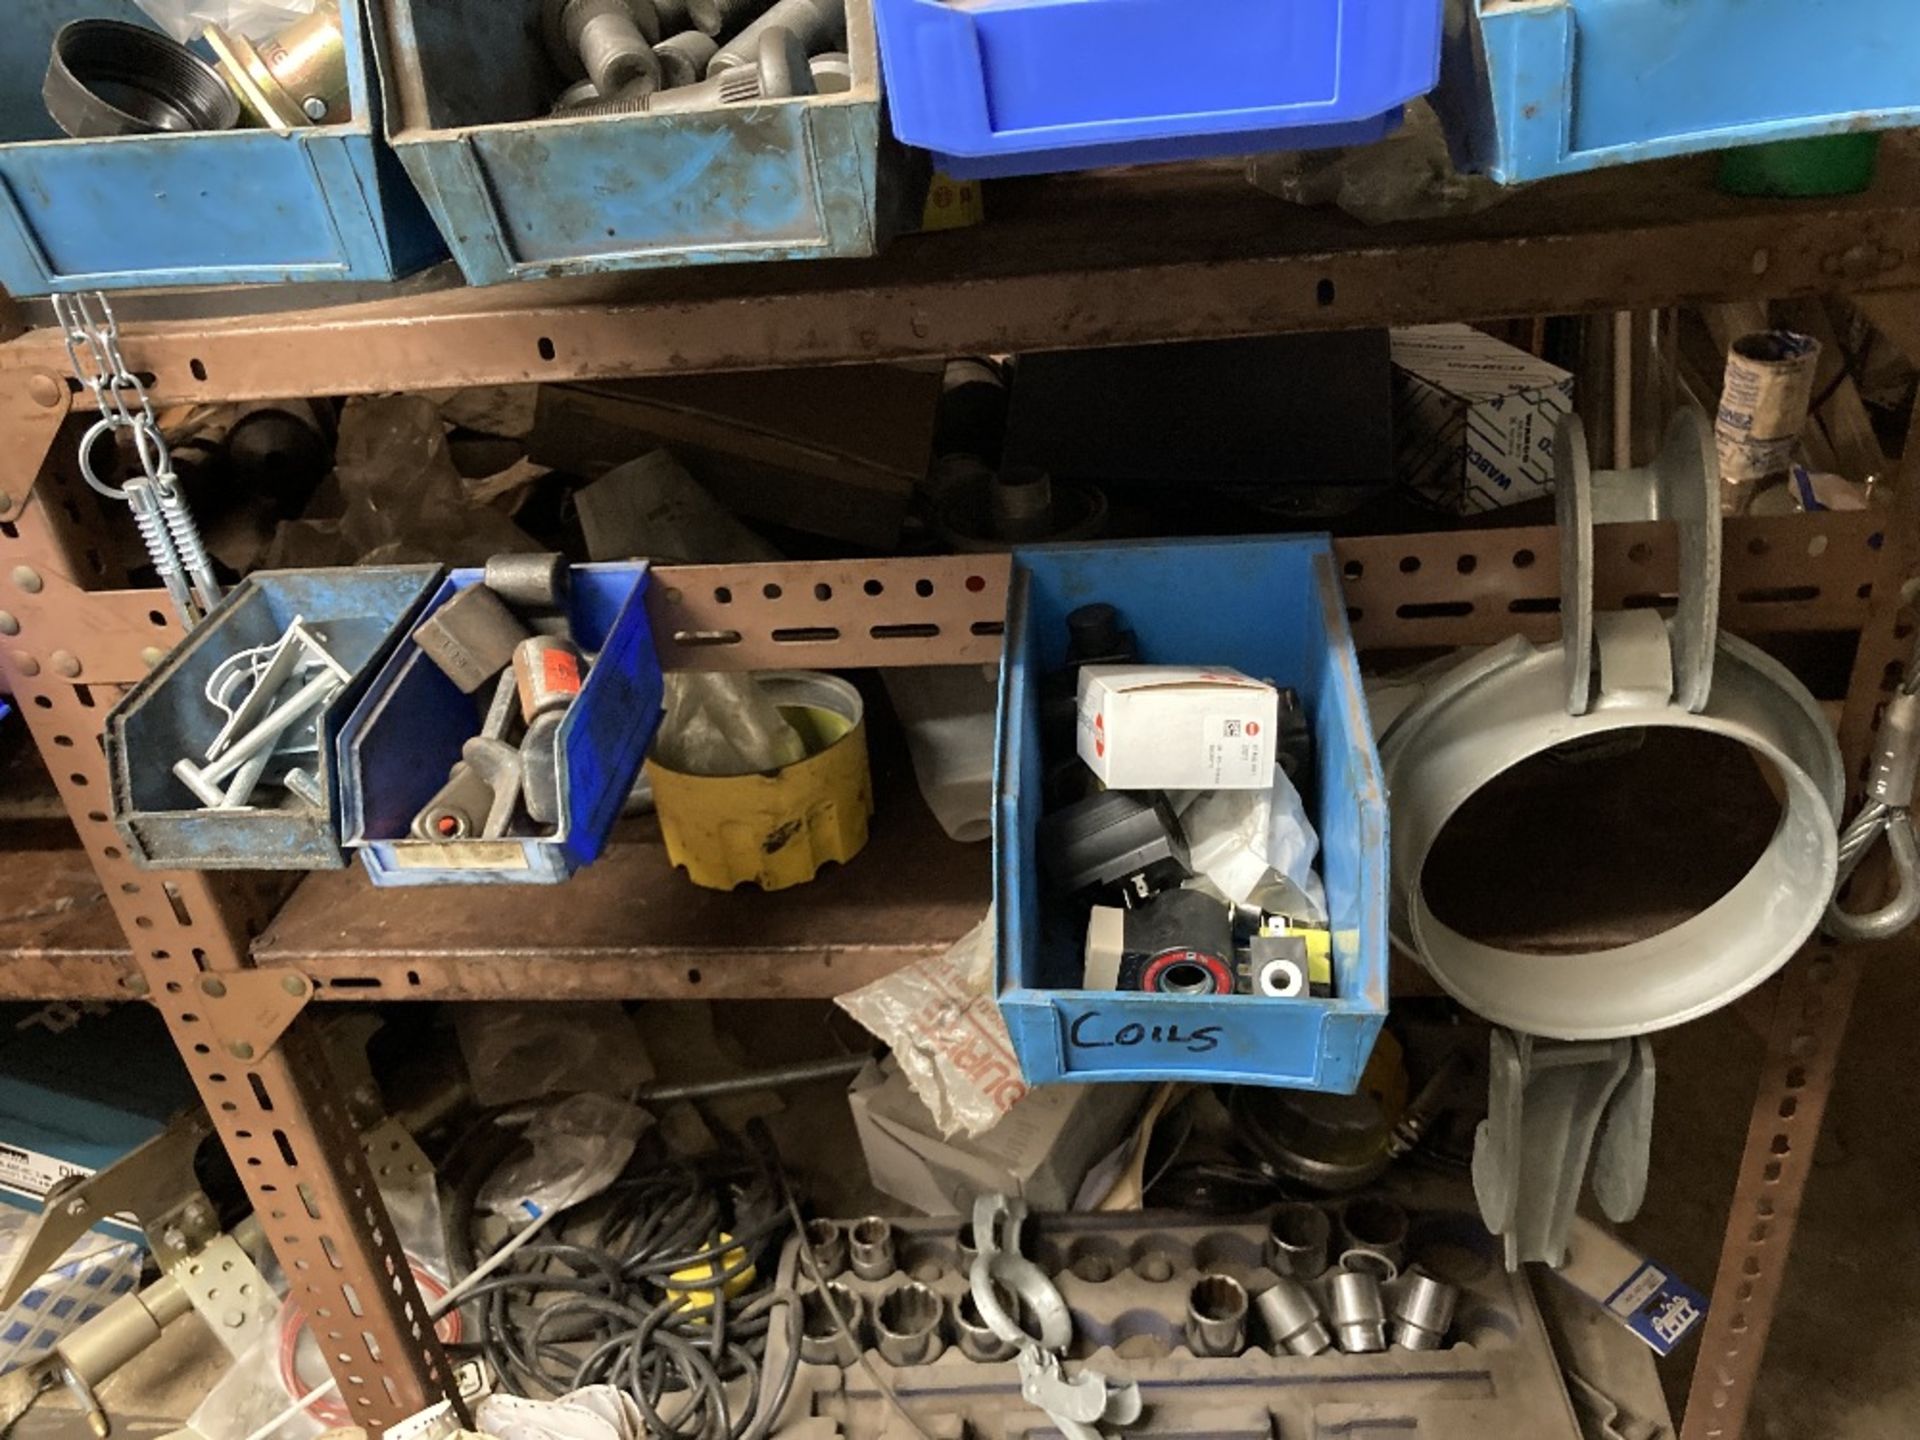 Content of Parts Room Containing Large Quantity of Various Parts & Components - Image 130 of 150